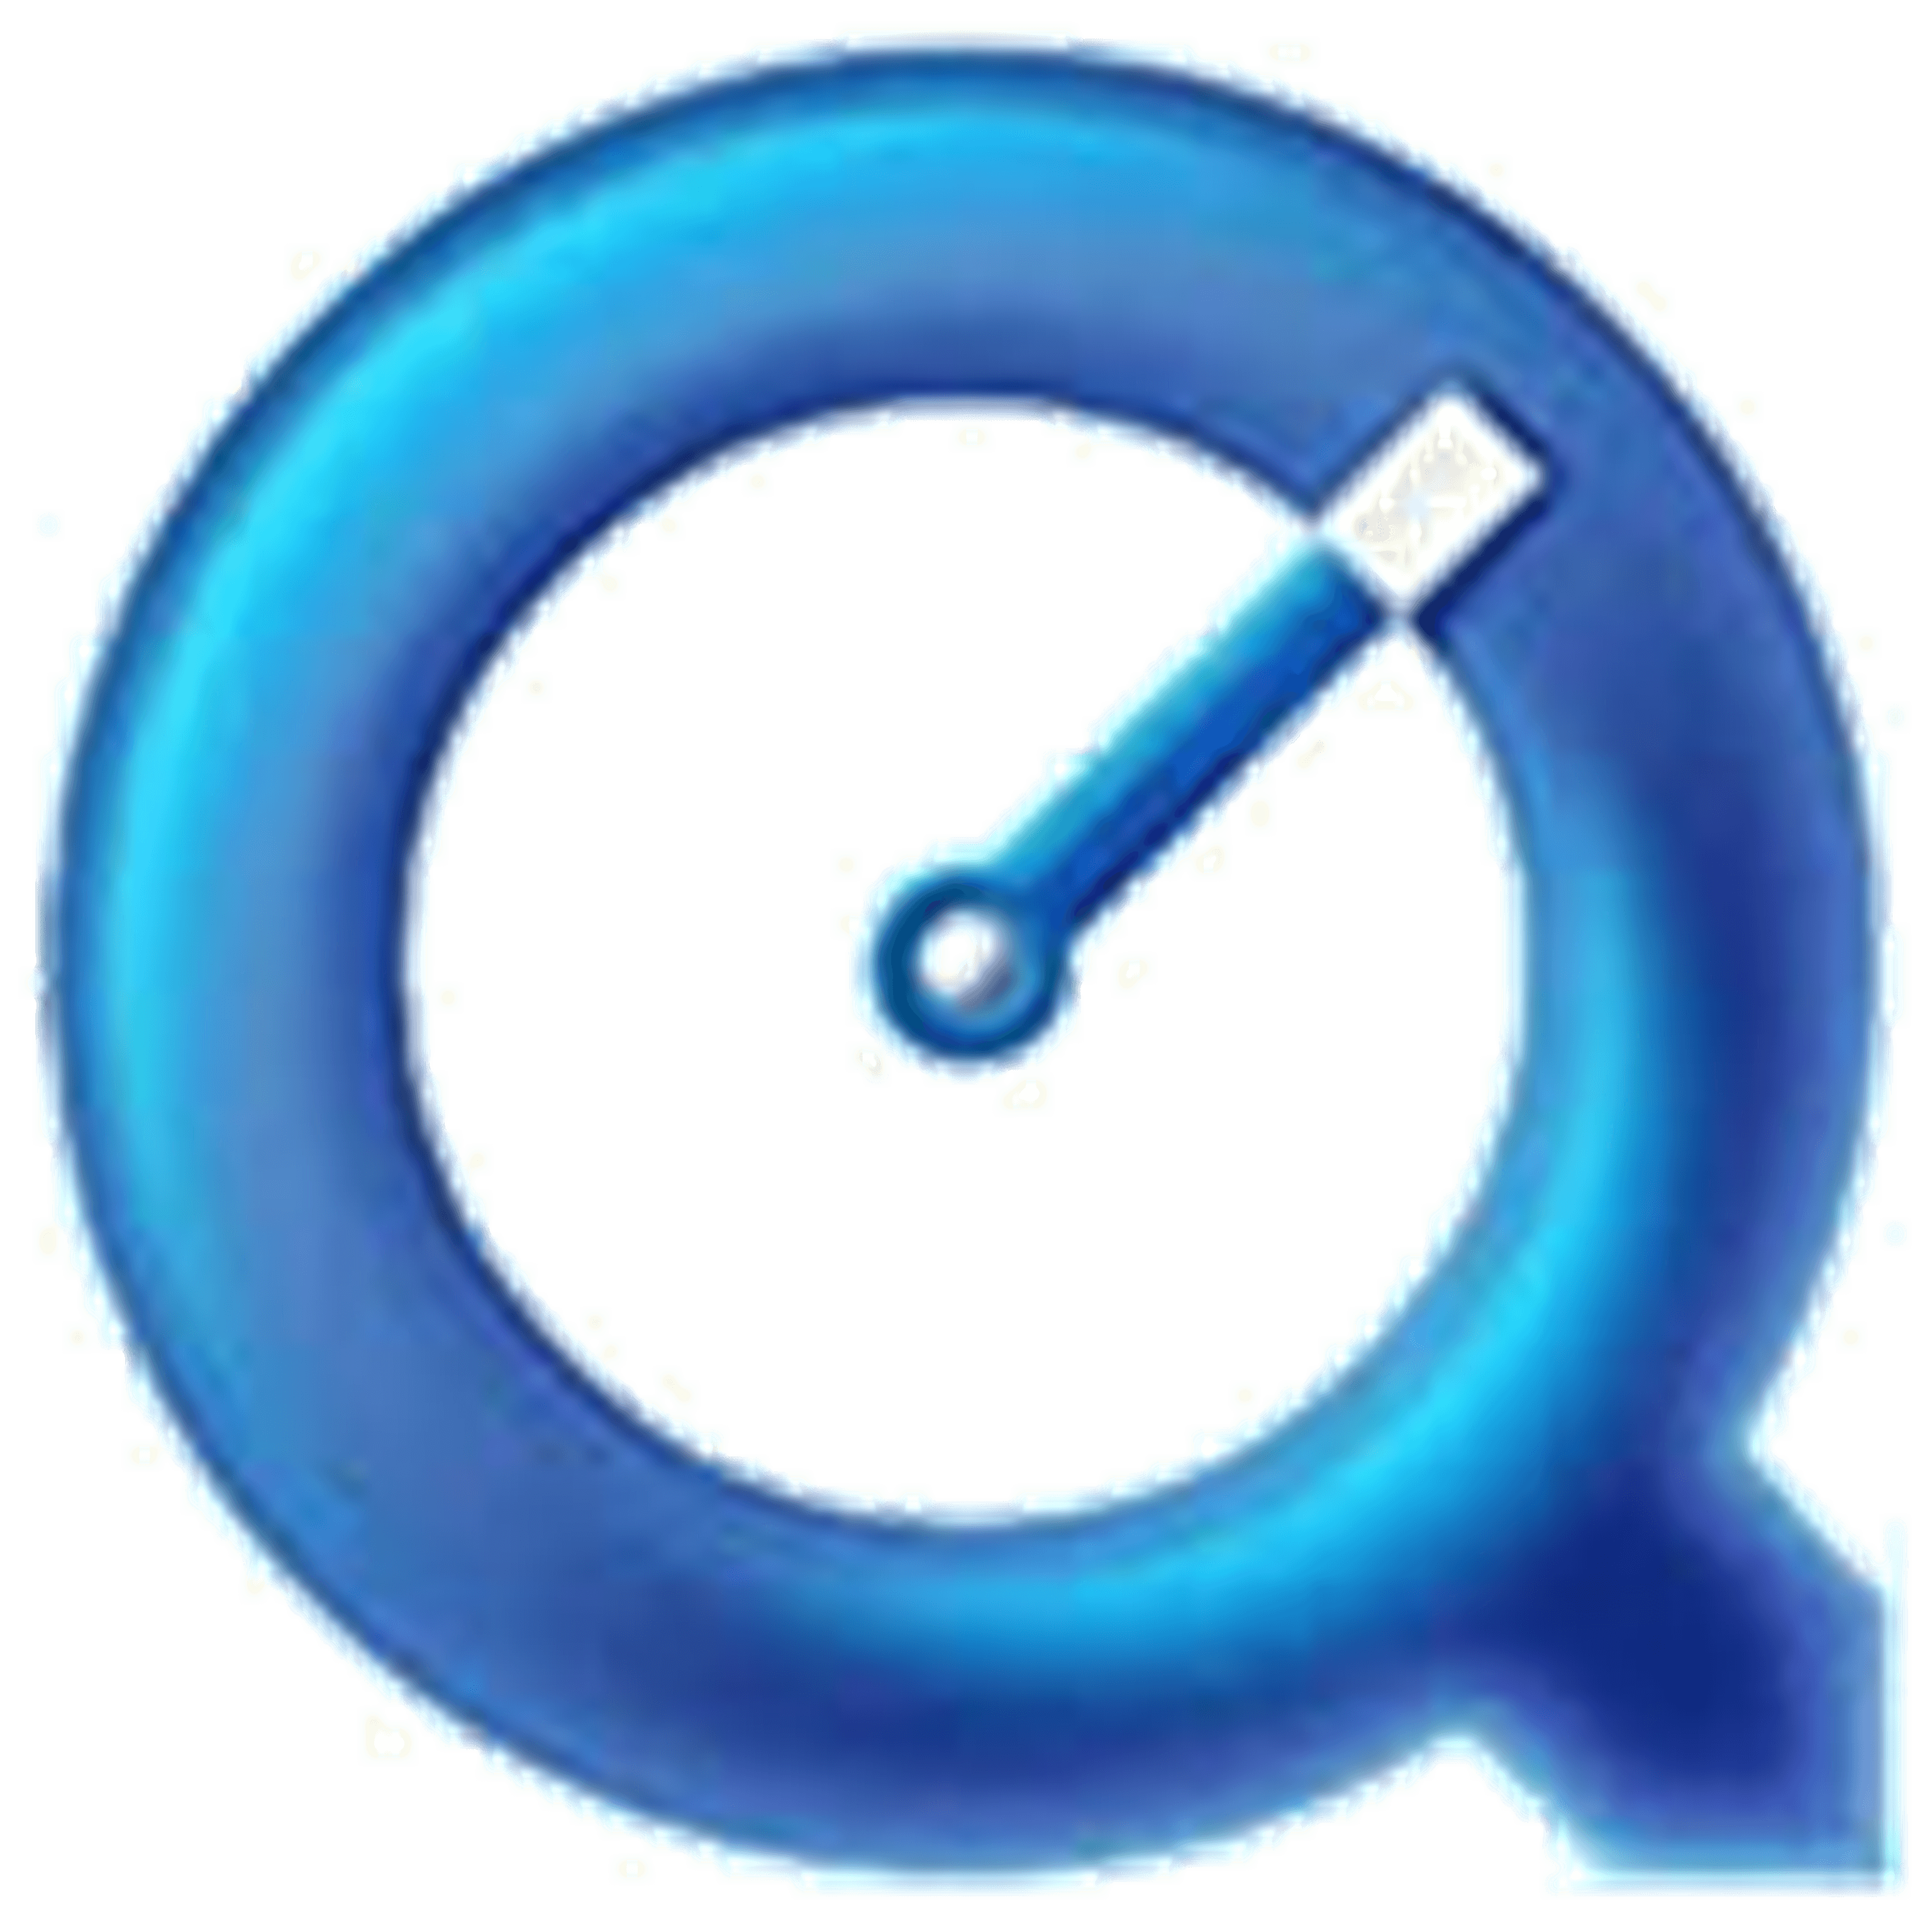 QuickTime Logo - QuickTime | Logopedia | FANDOM powered by Wikia